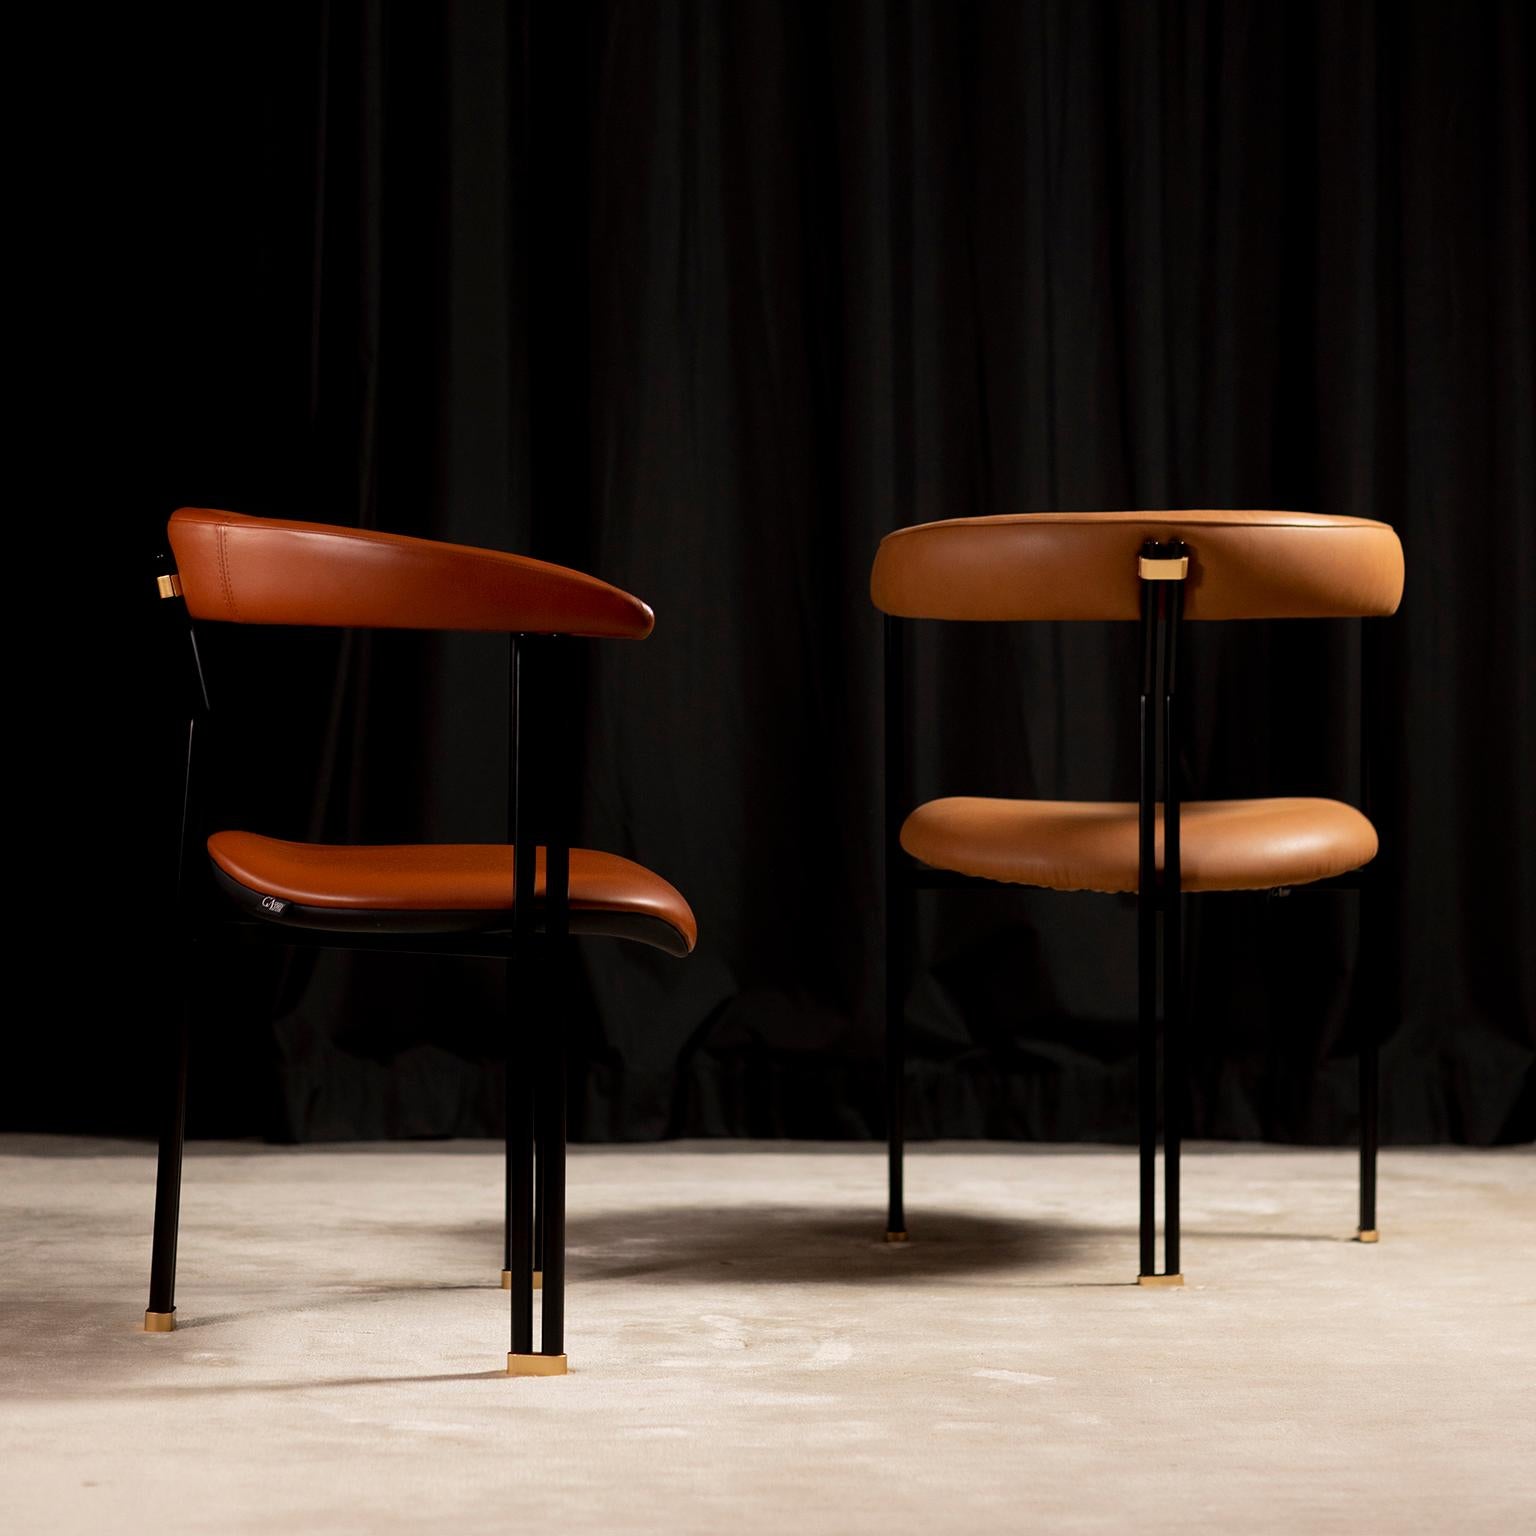 Contemporary Modern Maia Dining Chairs, Italian Leather, Handmade in Portugal by Greenapple For Sale